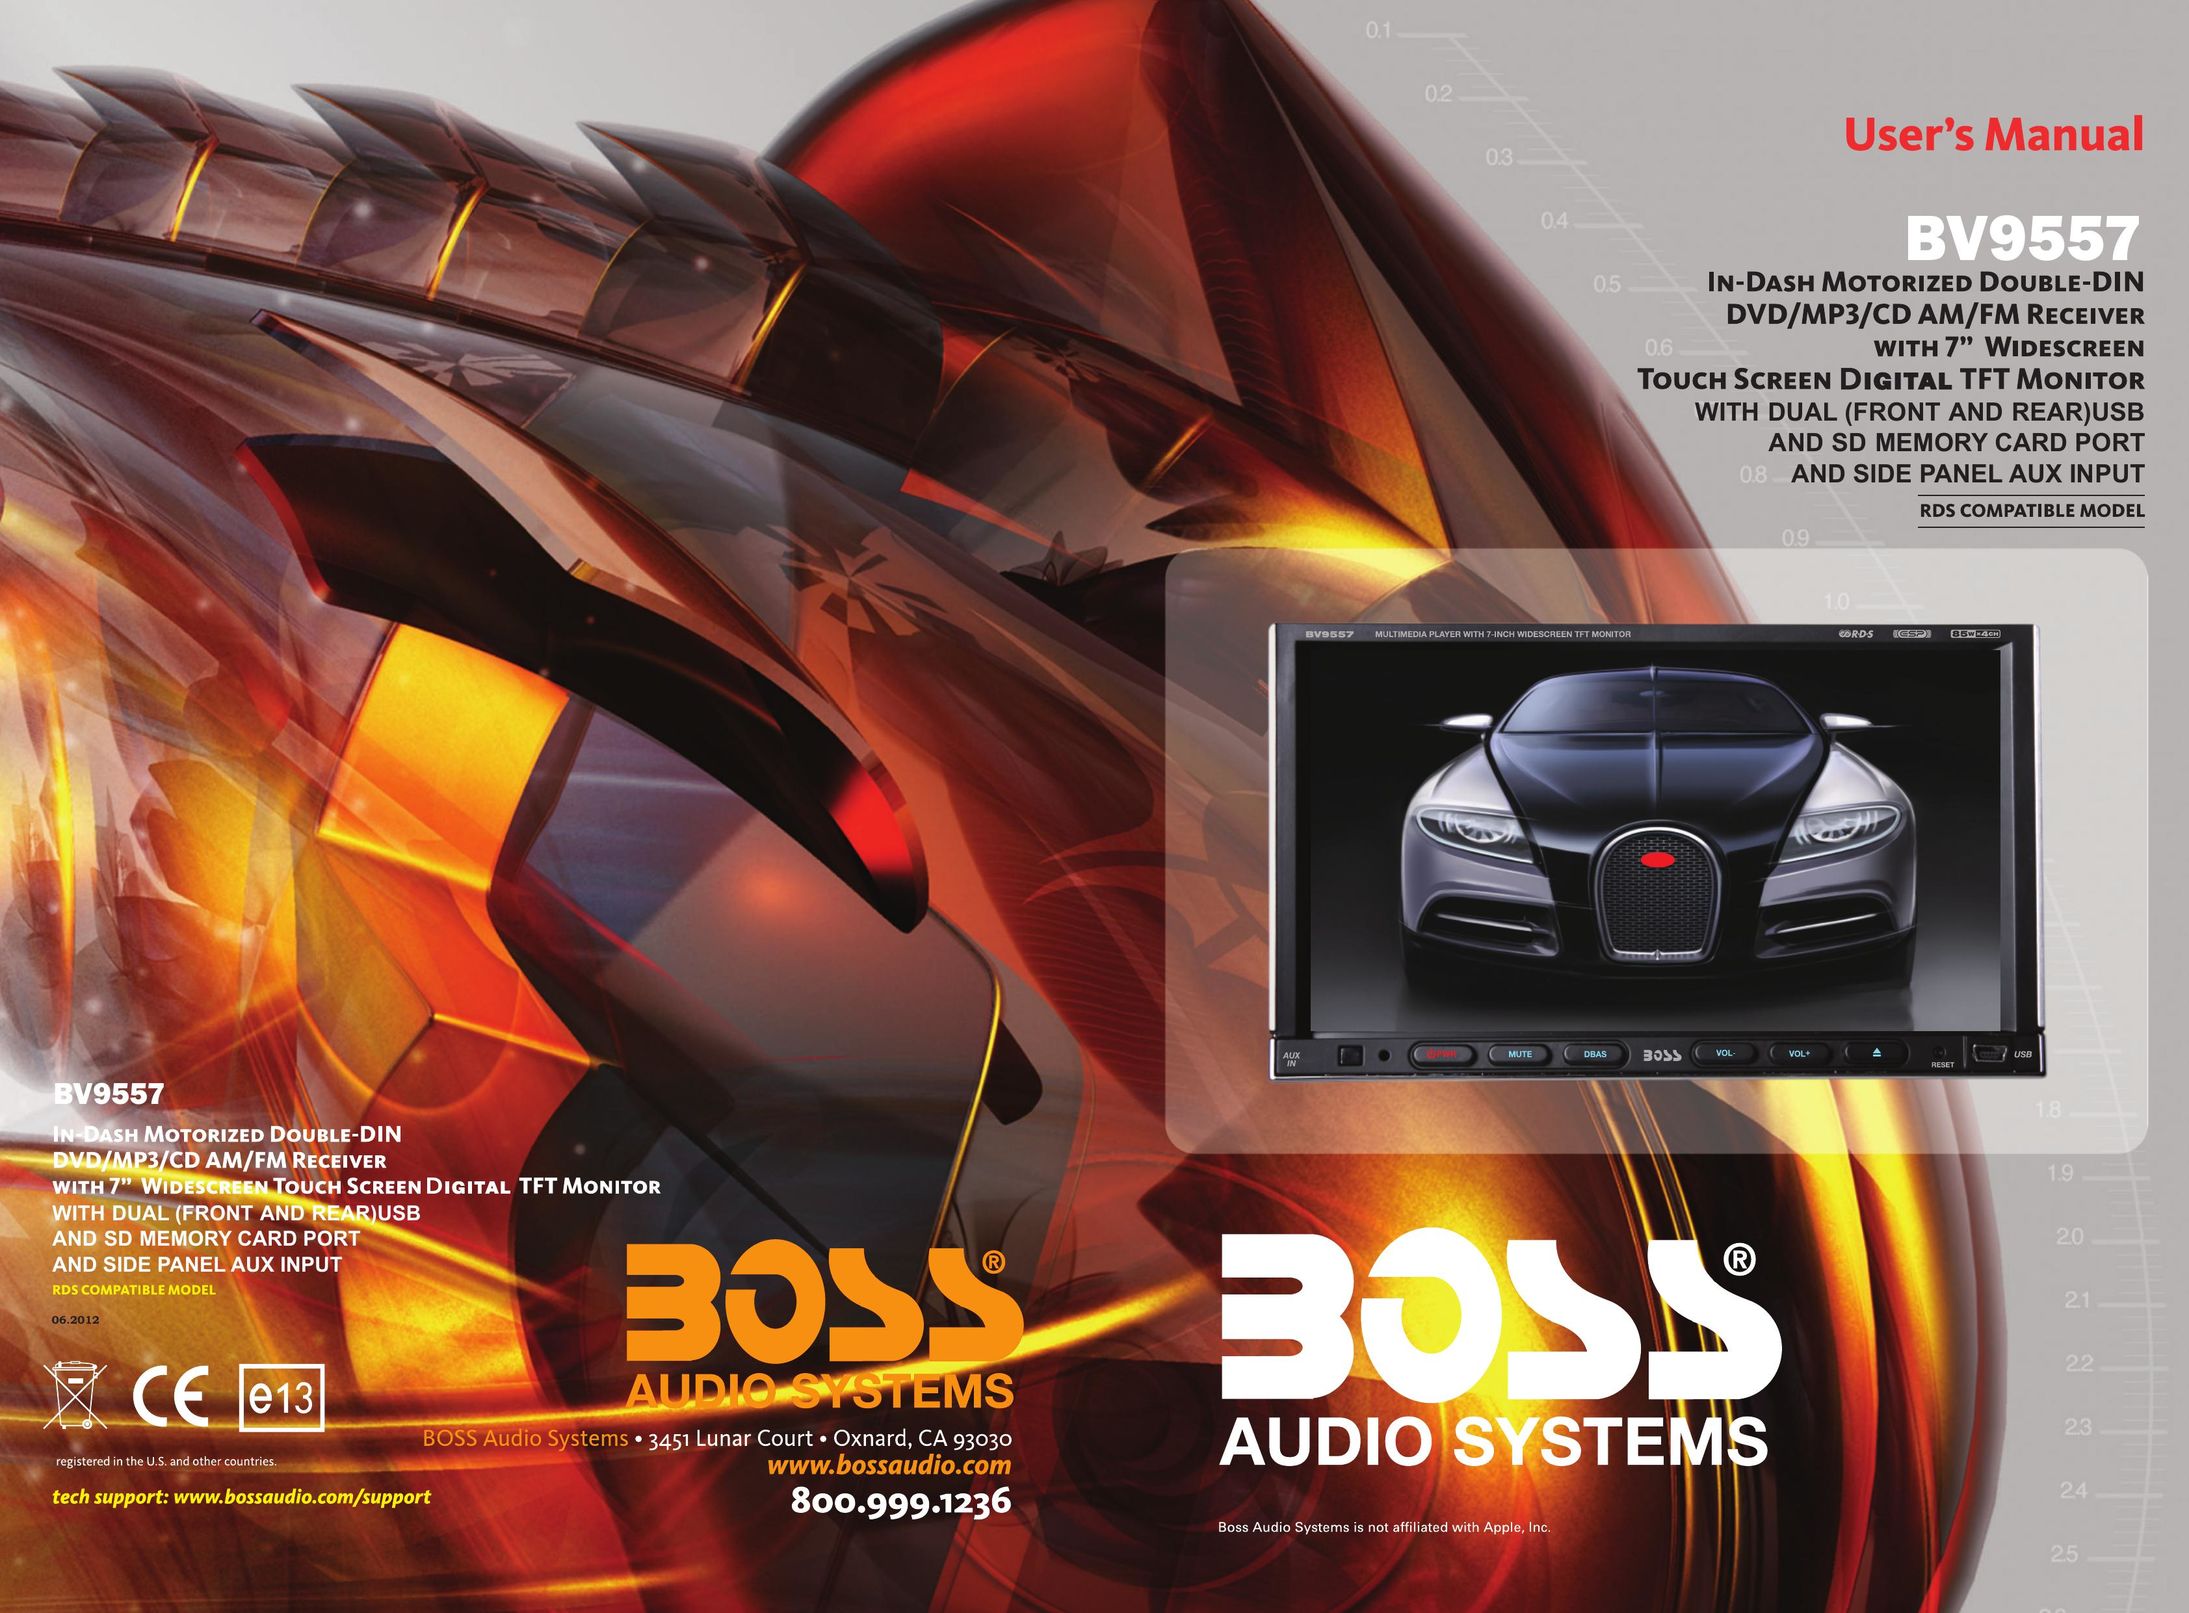 Boss Audio Systems BV9557 Car Satellite Radio System User Manual (Page 1)